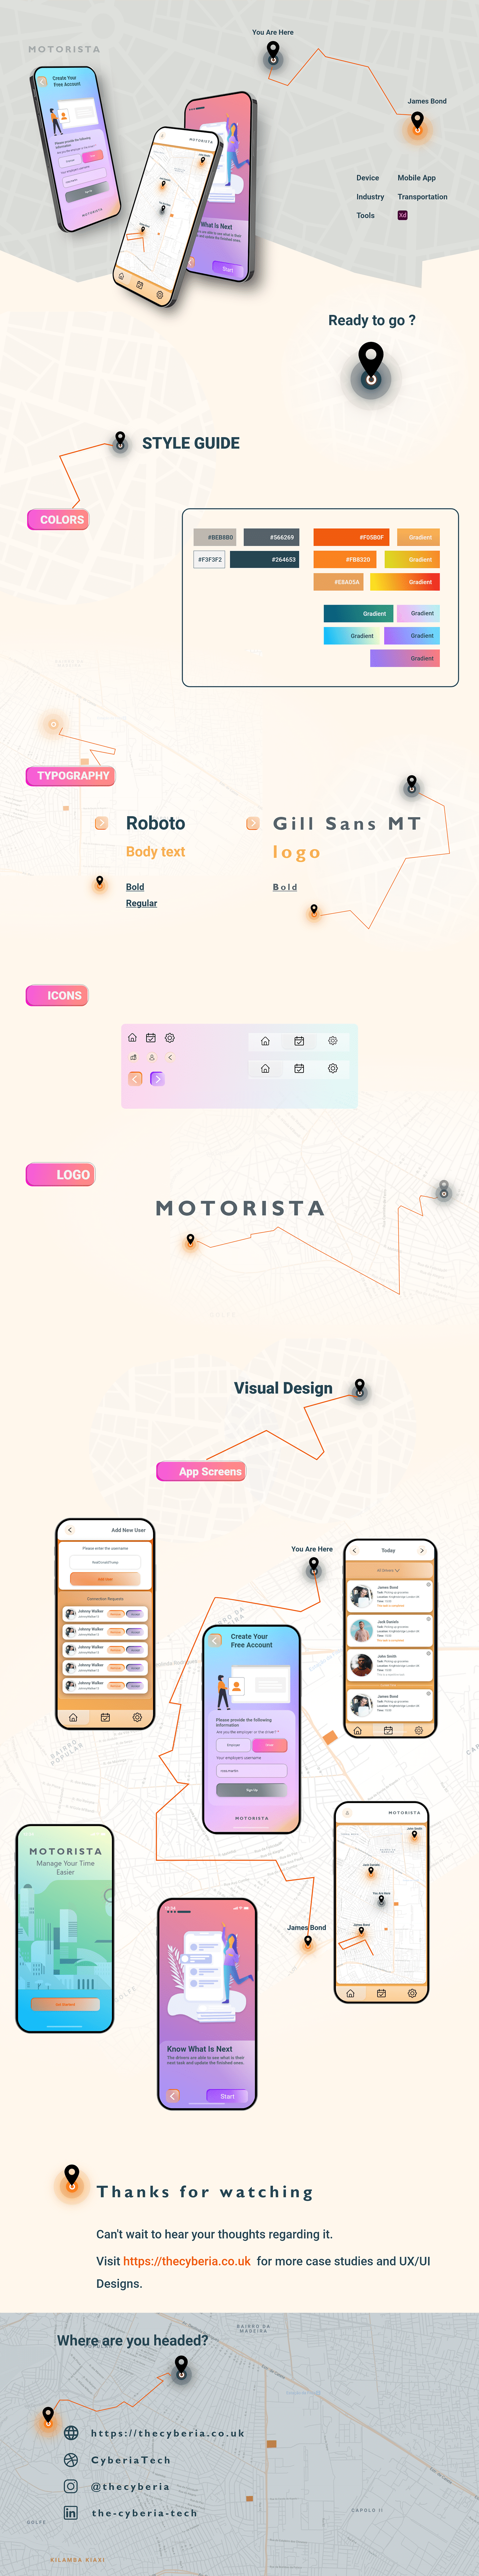 Motorista - Manage your time better